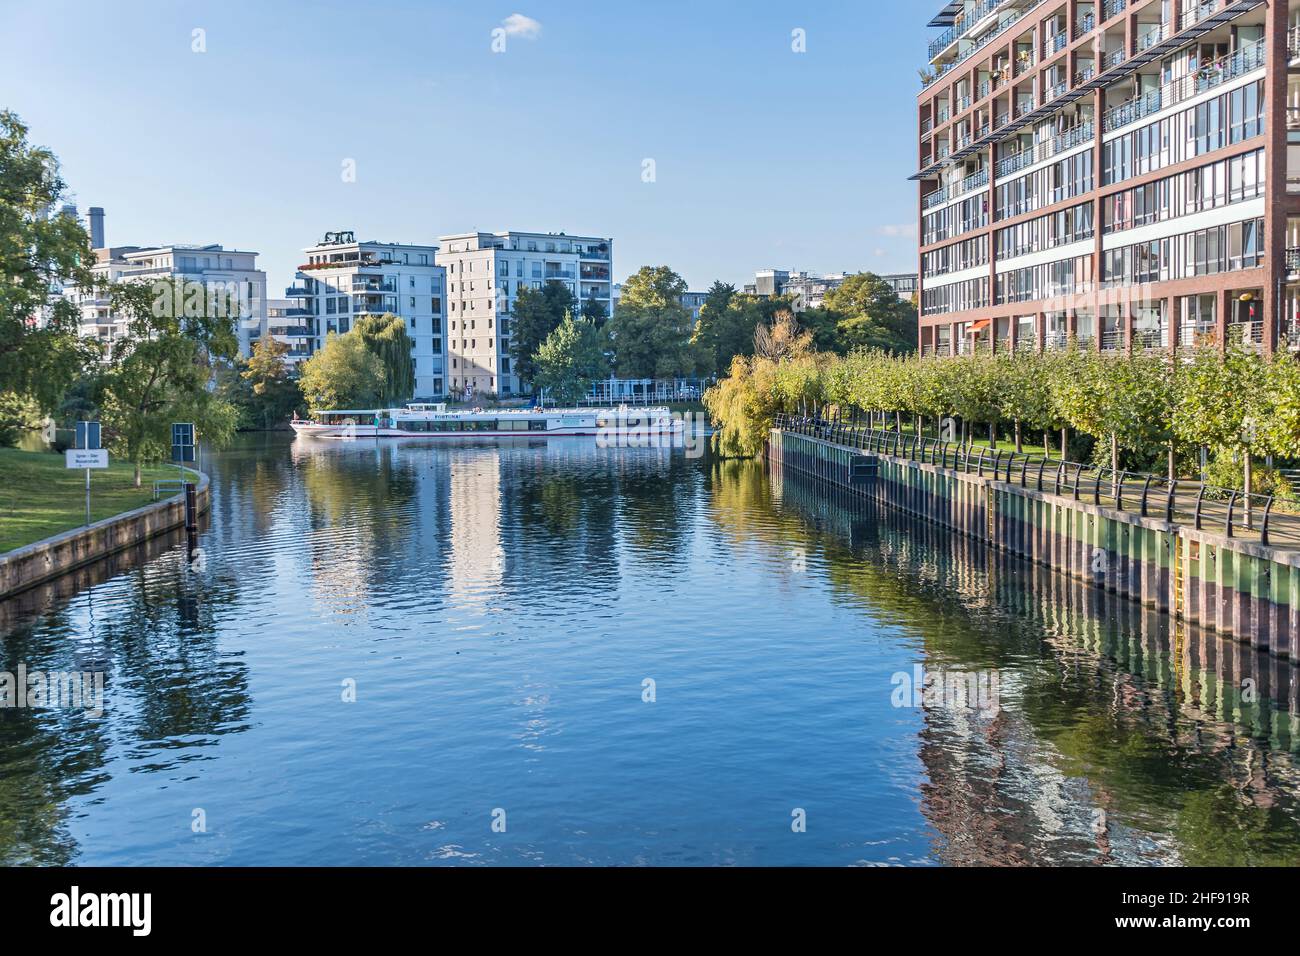 Berlin, Germany - October 7, 2021: Banks of the Landwehr Canal Salzufer and Einsteinufer with modern residential houses and sightseeing boat Fortuna a Stock Photo